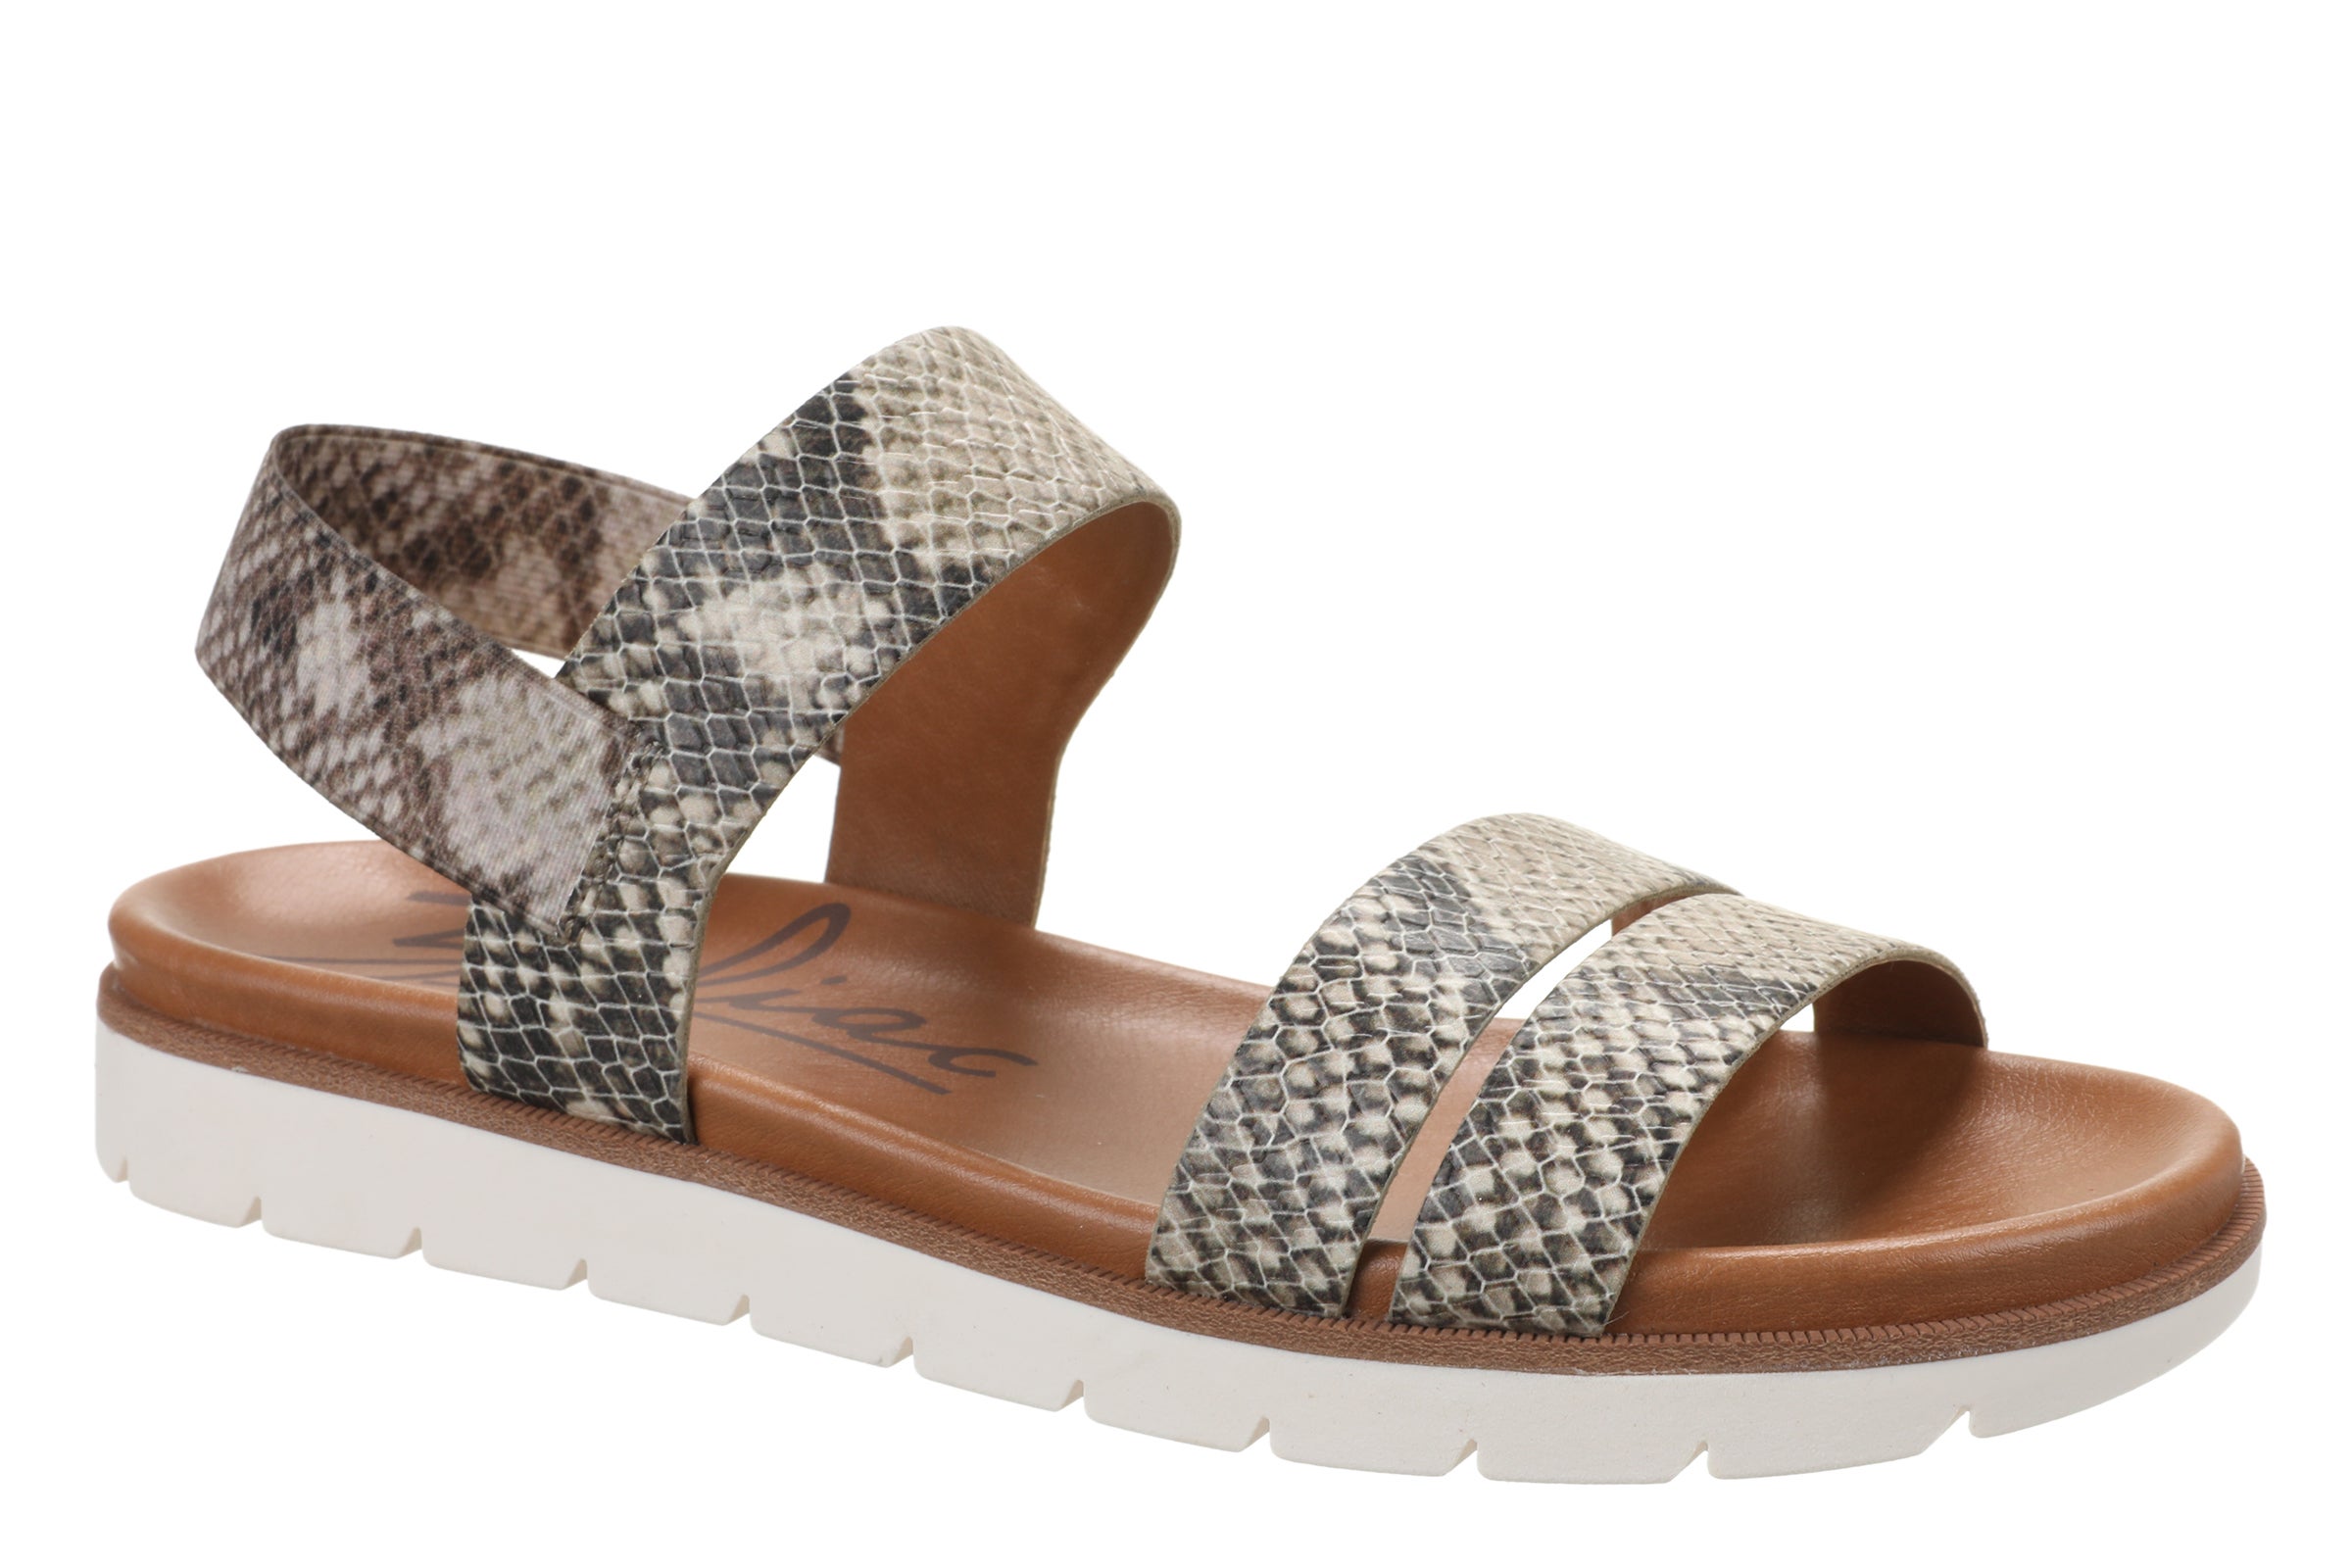 These Are The 8 Best Sandals For Summer 2021 | Essence